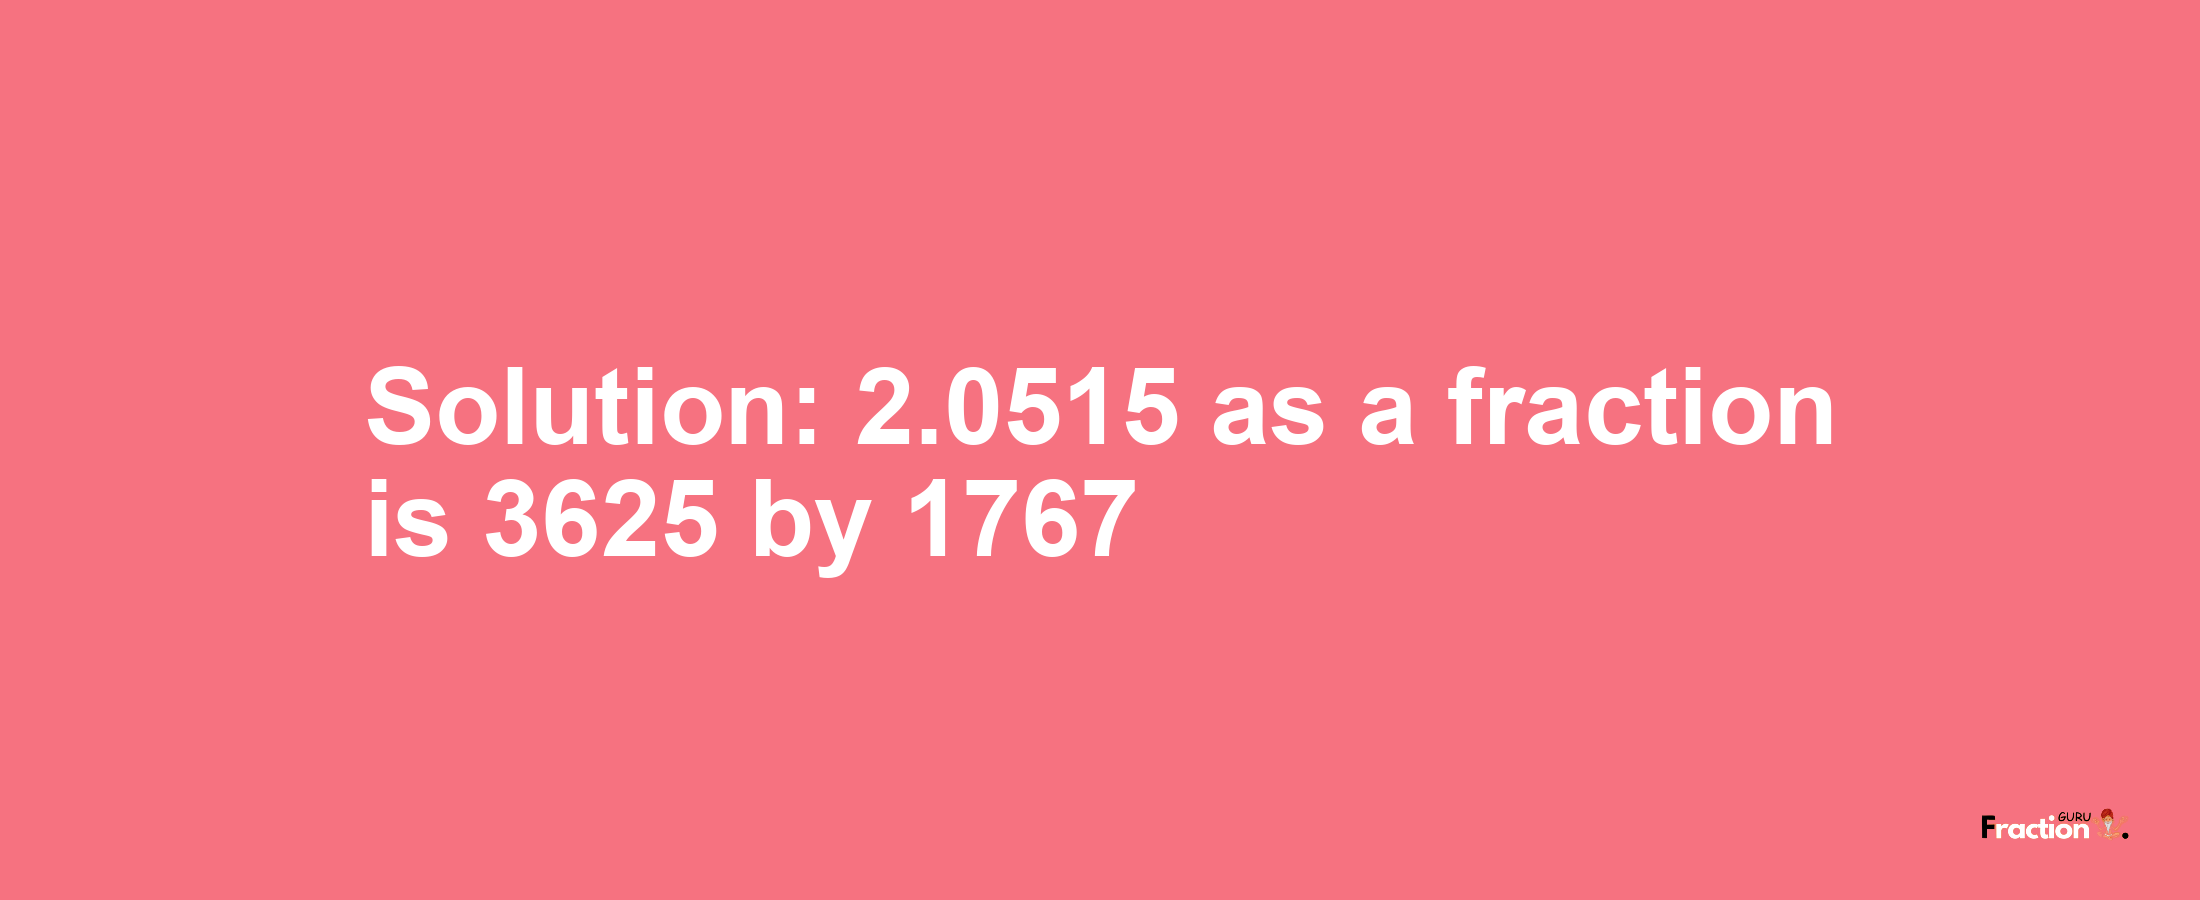 Solution:2.0515 as a fraction is 3625/1767